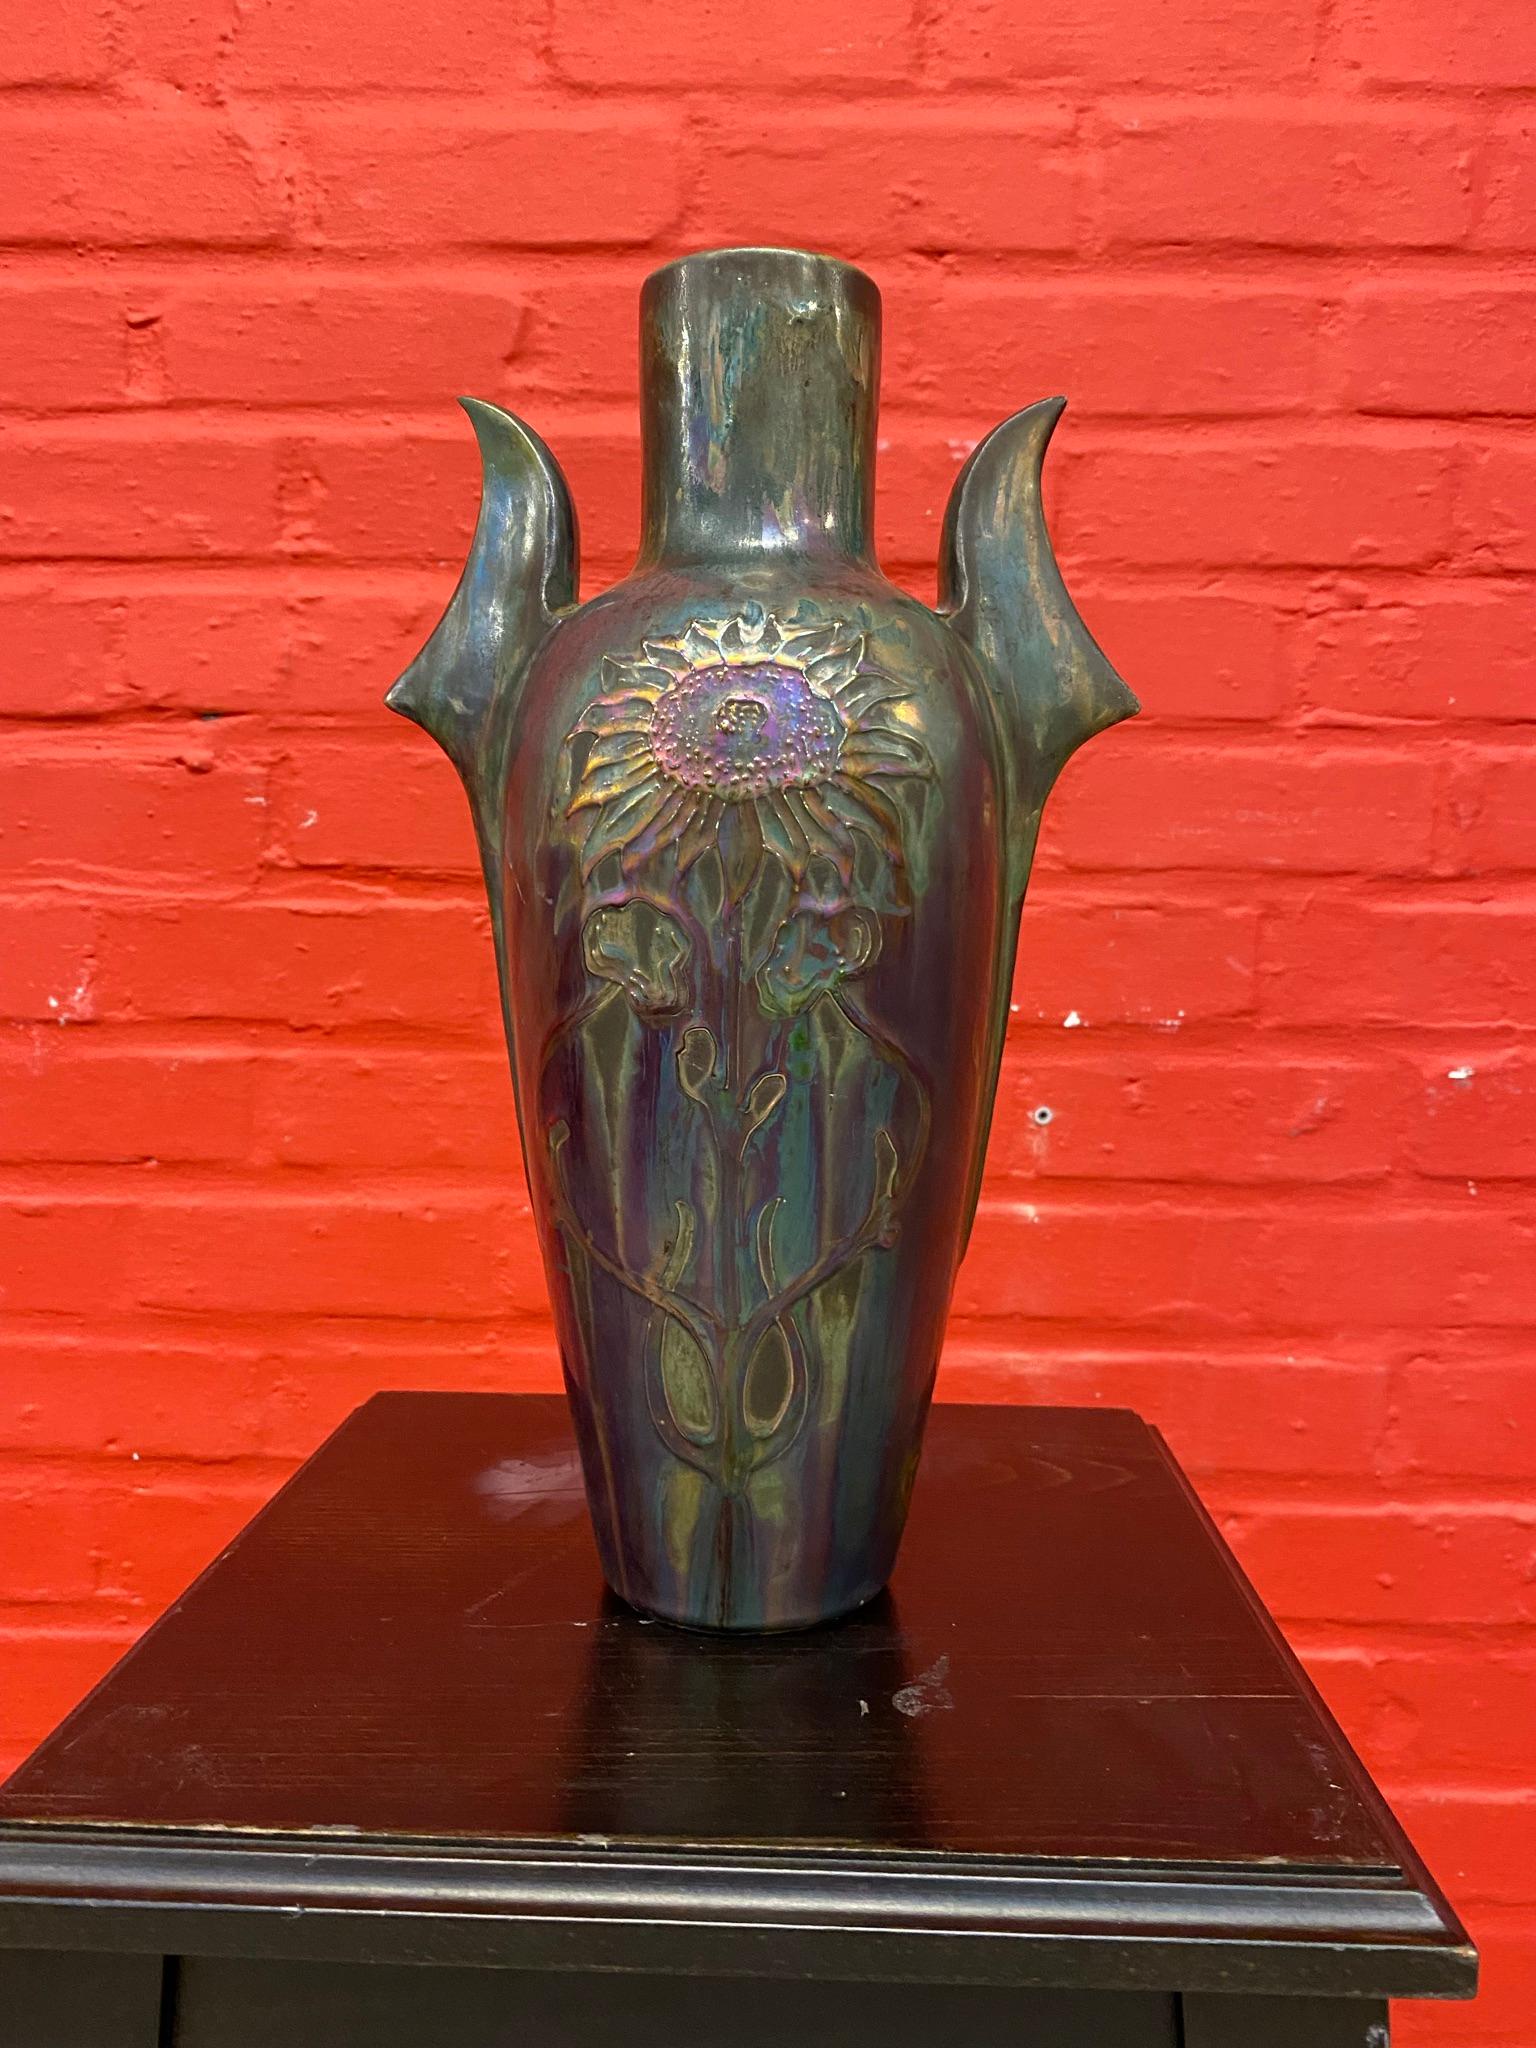 Glazed and iridescent ceramic, circa 1900/1920 in the style of Massier.